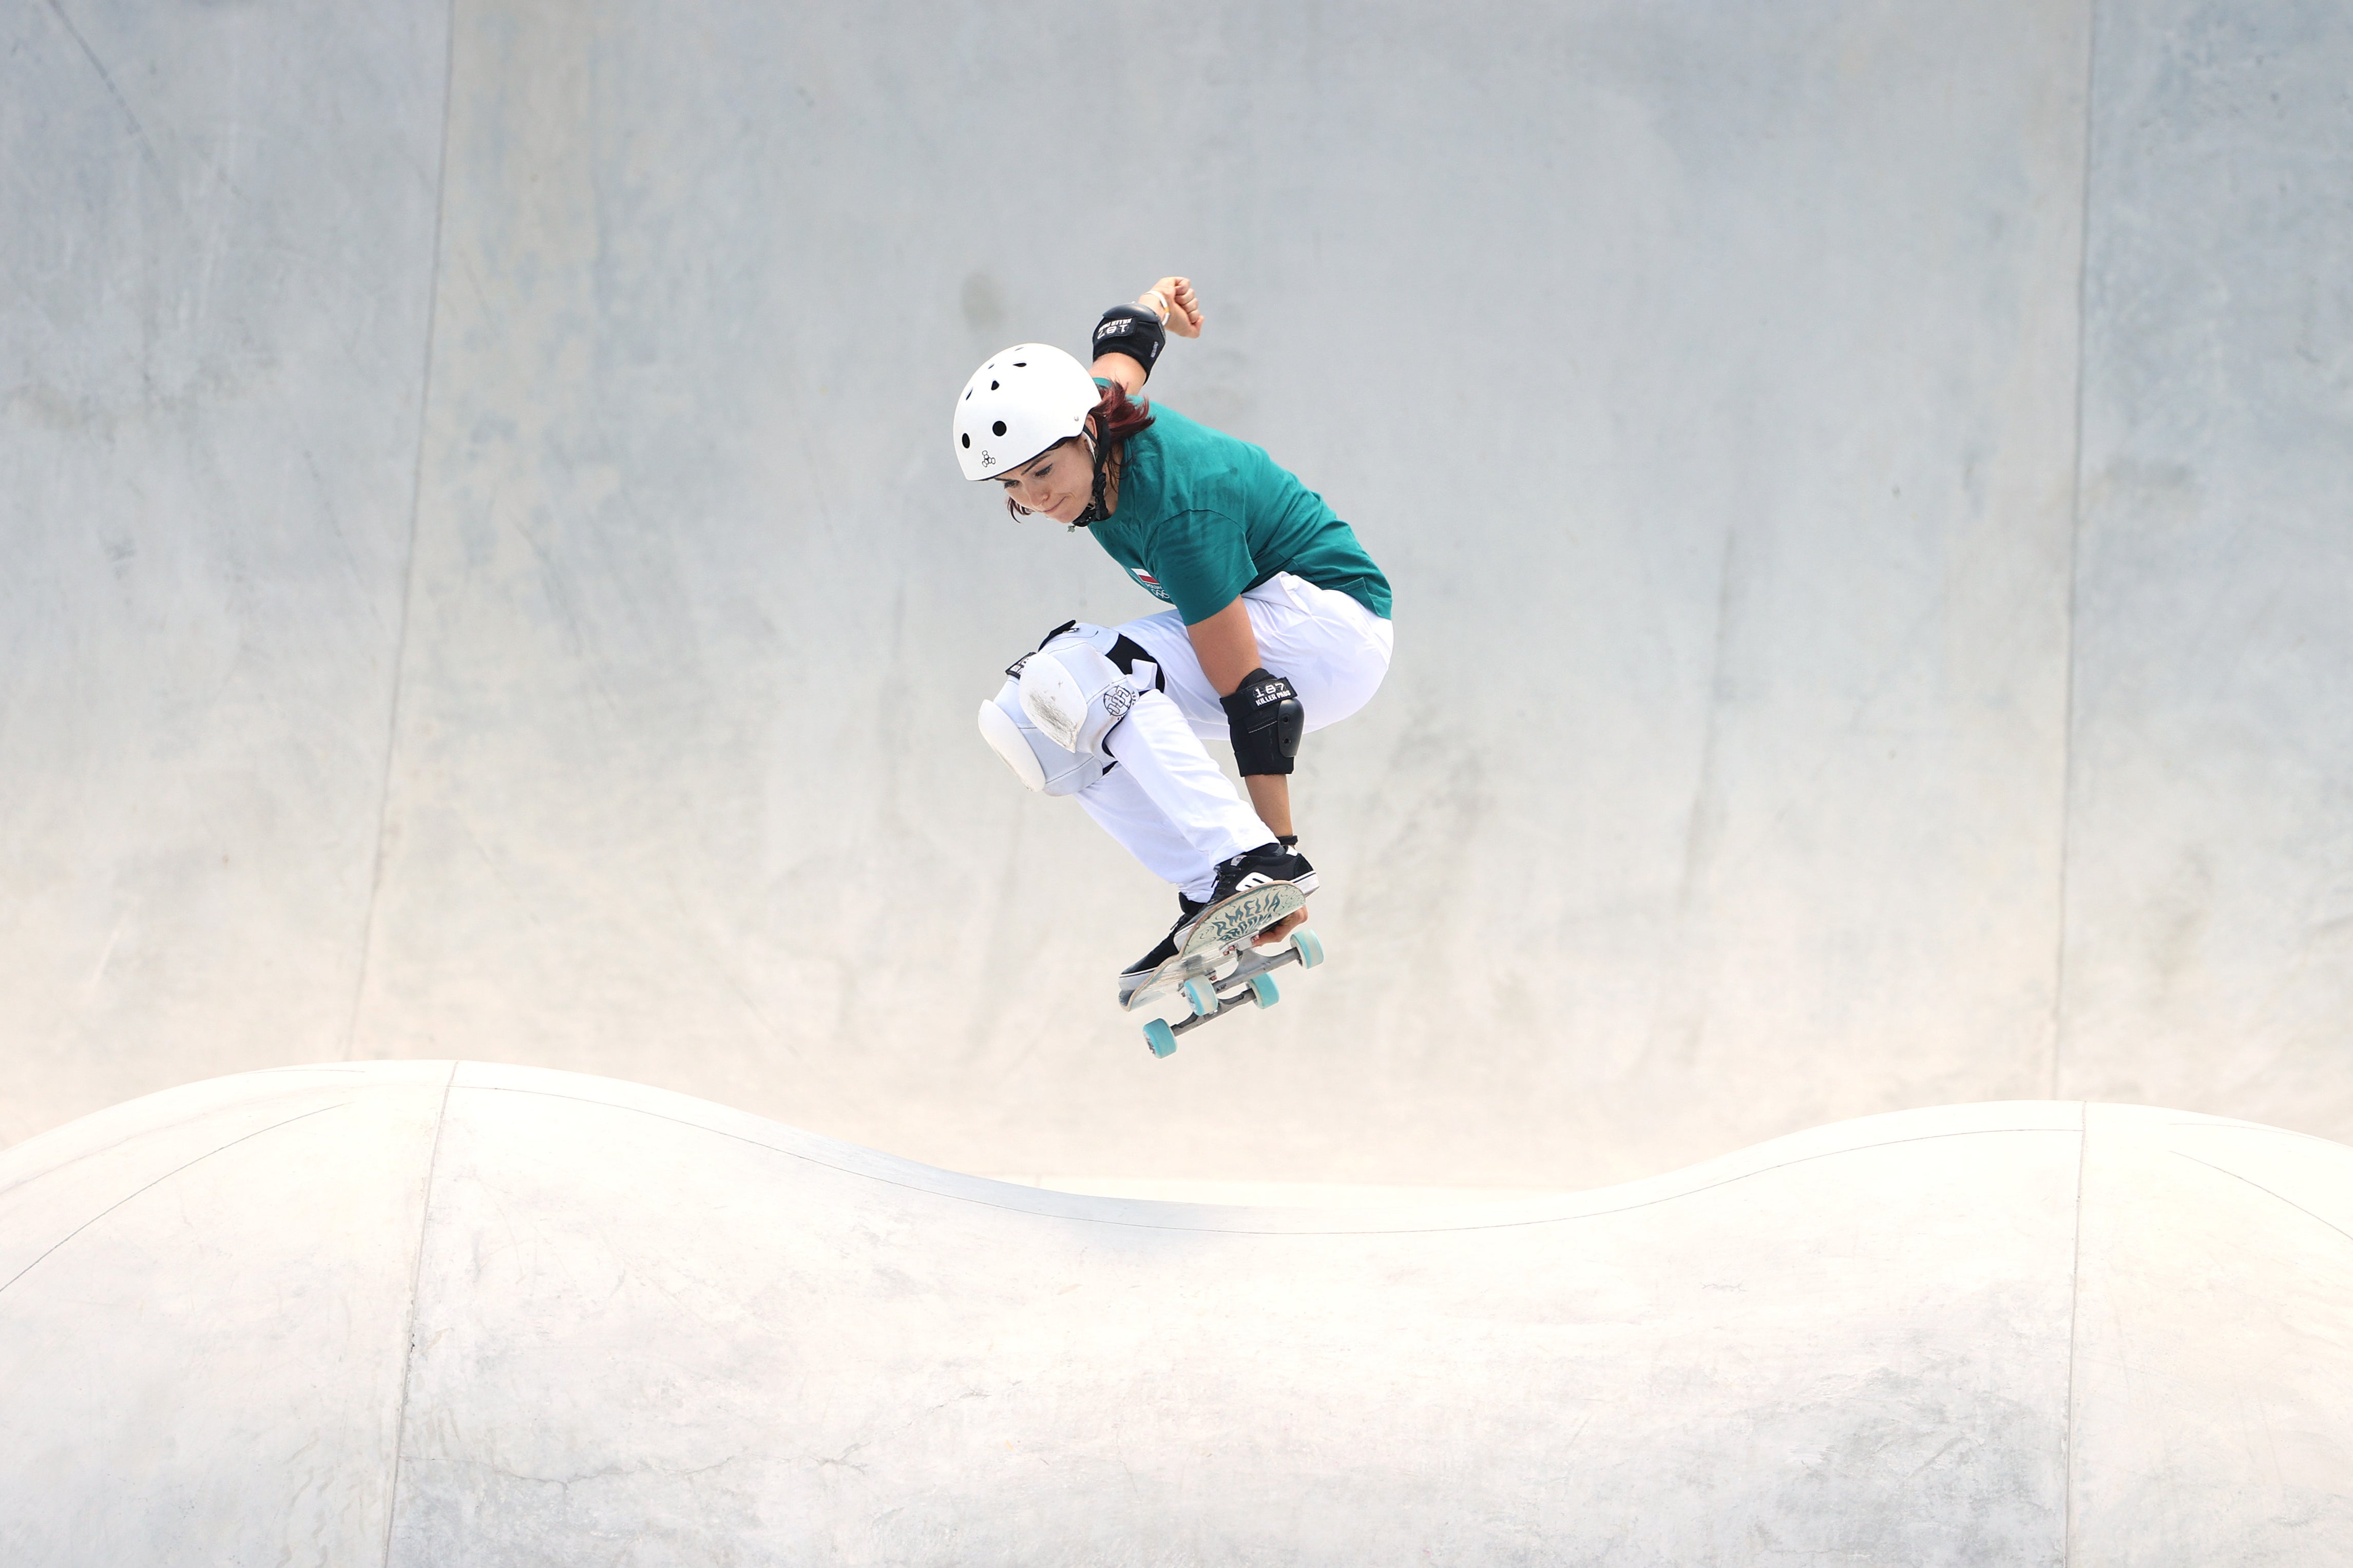 Amelia Brodka competed at Tokyo 2020 and is the co-founder of the Exposure Skate event